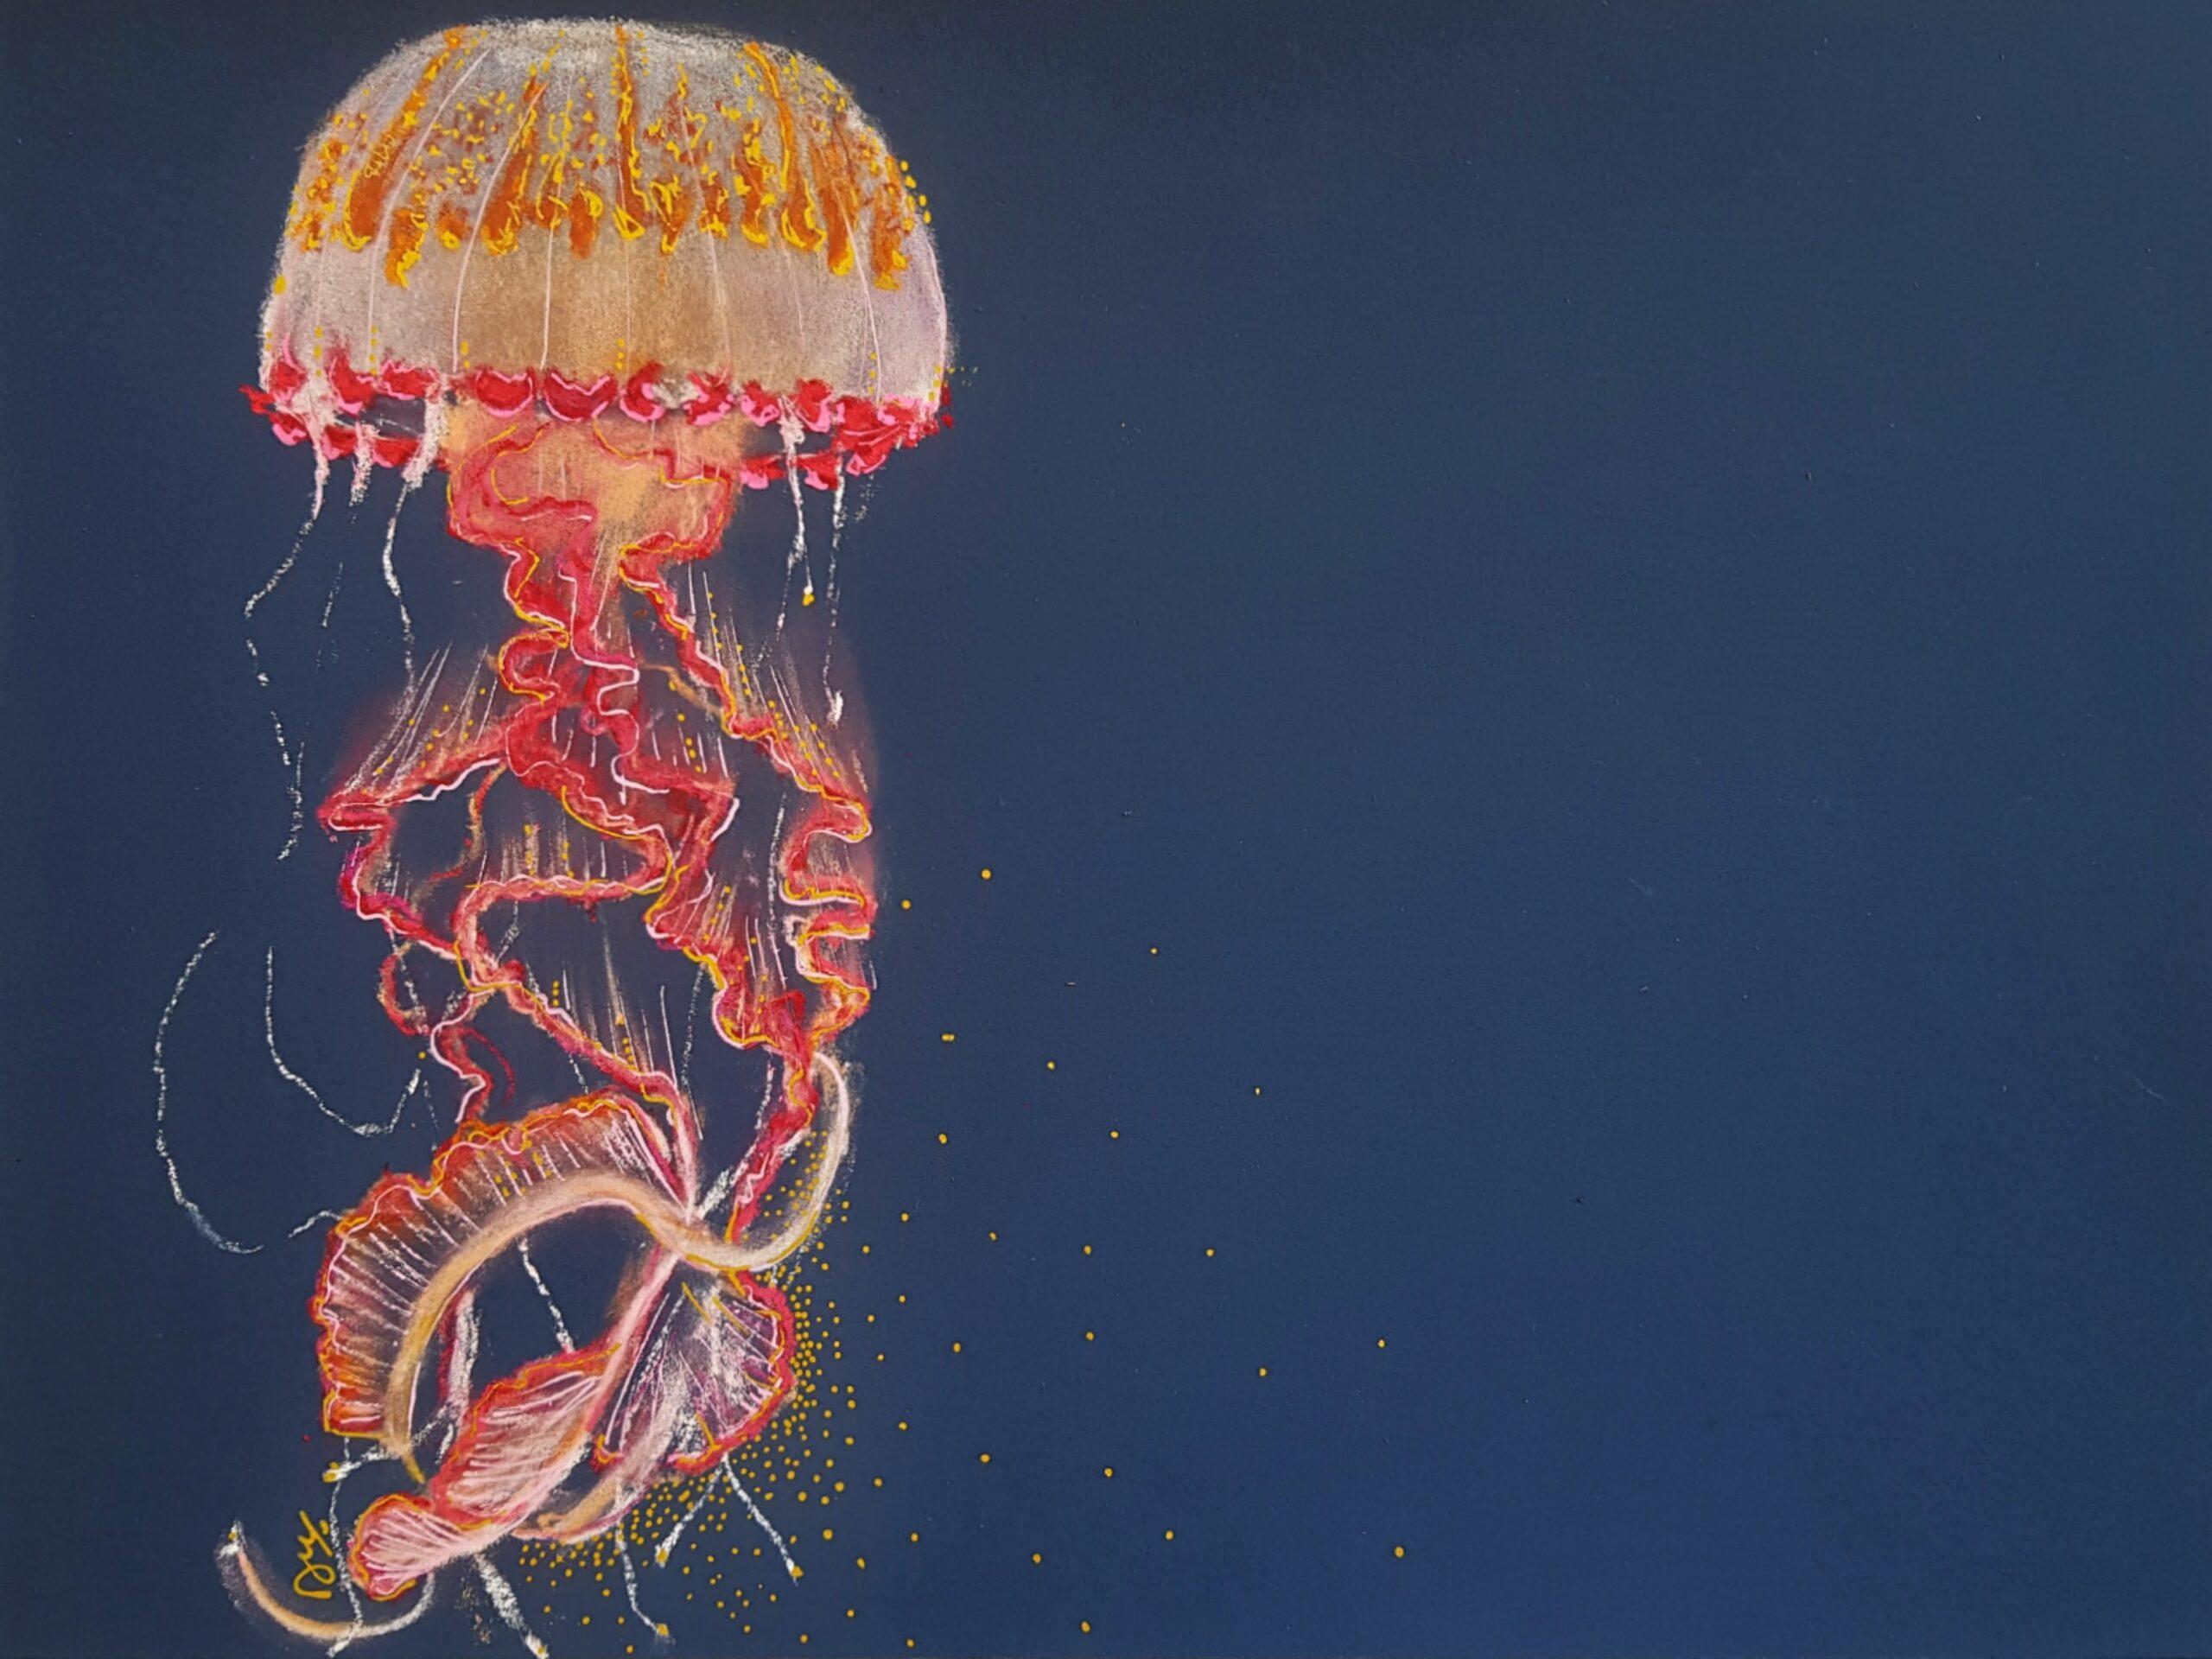 Jellyfish by Delmont - Painting by Unknown